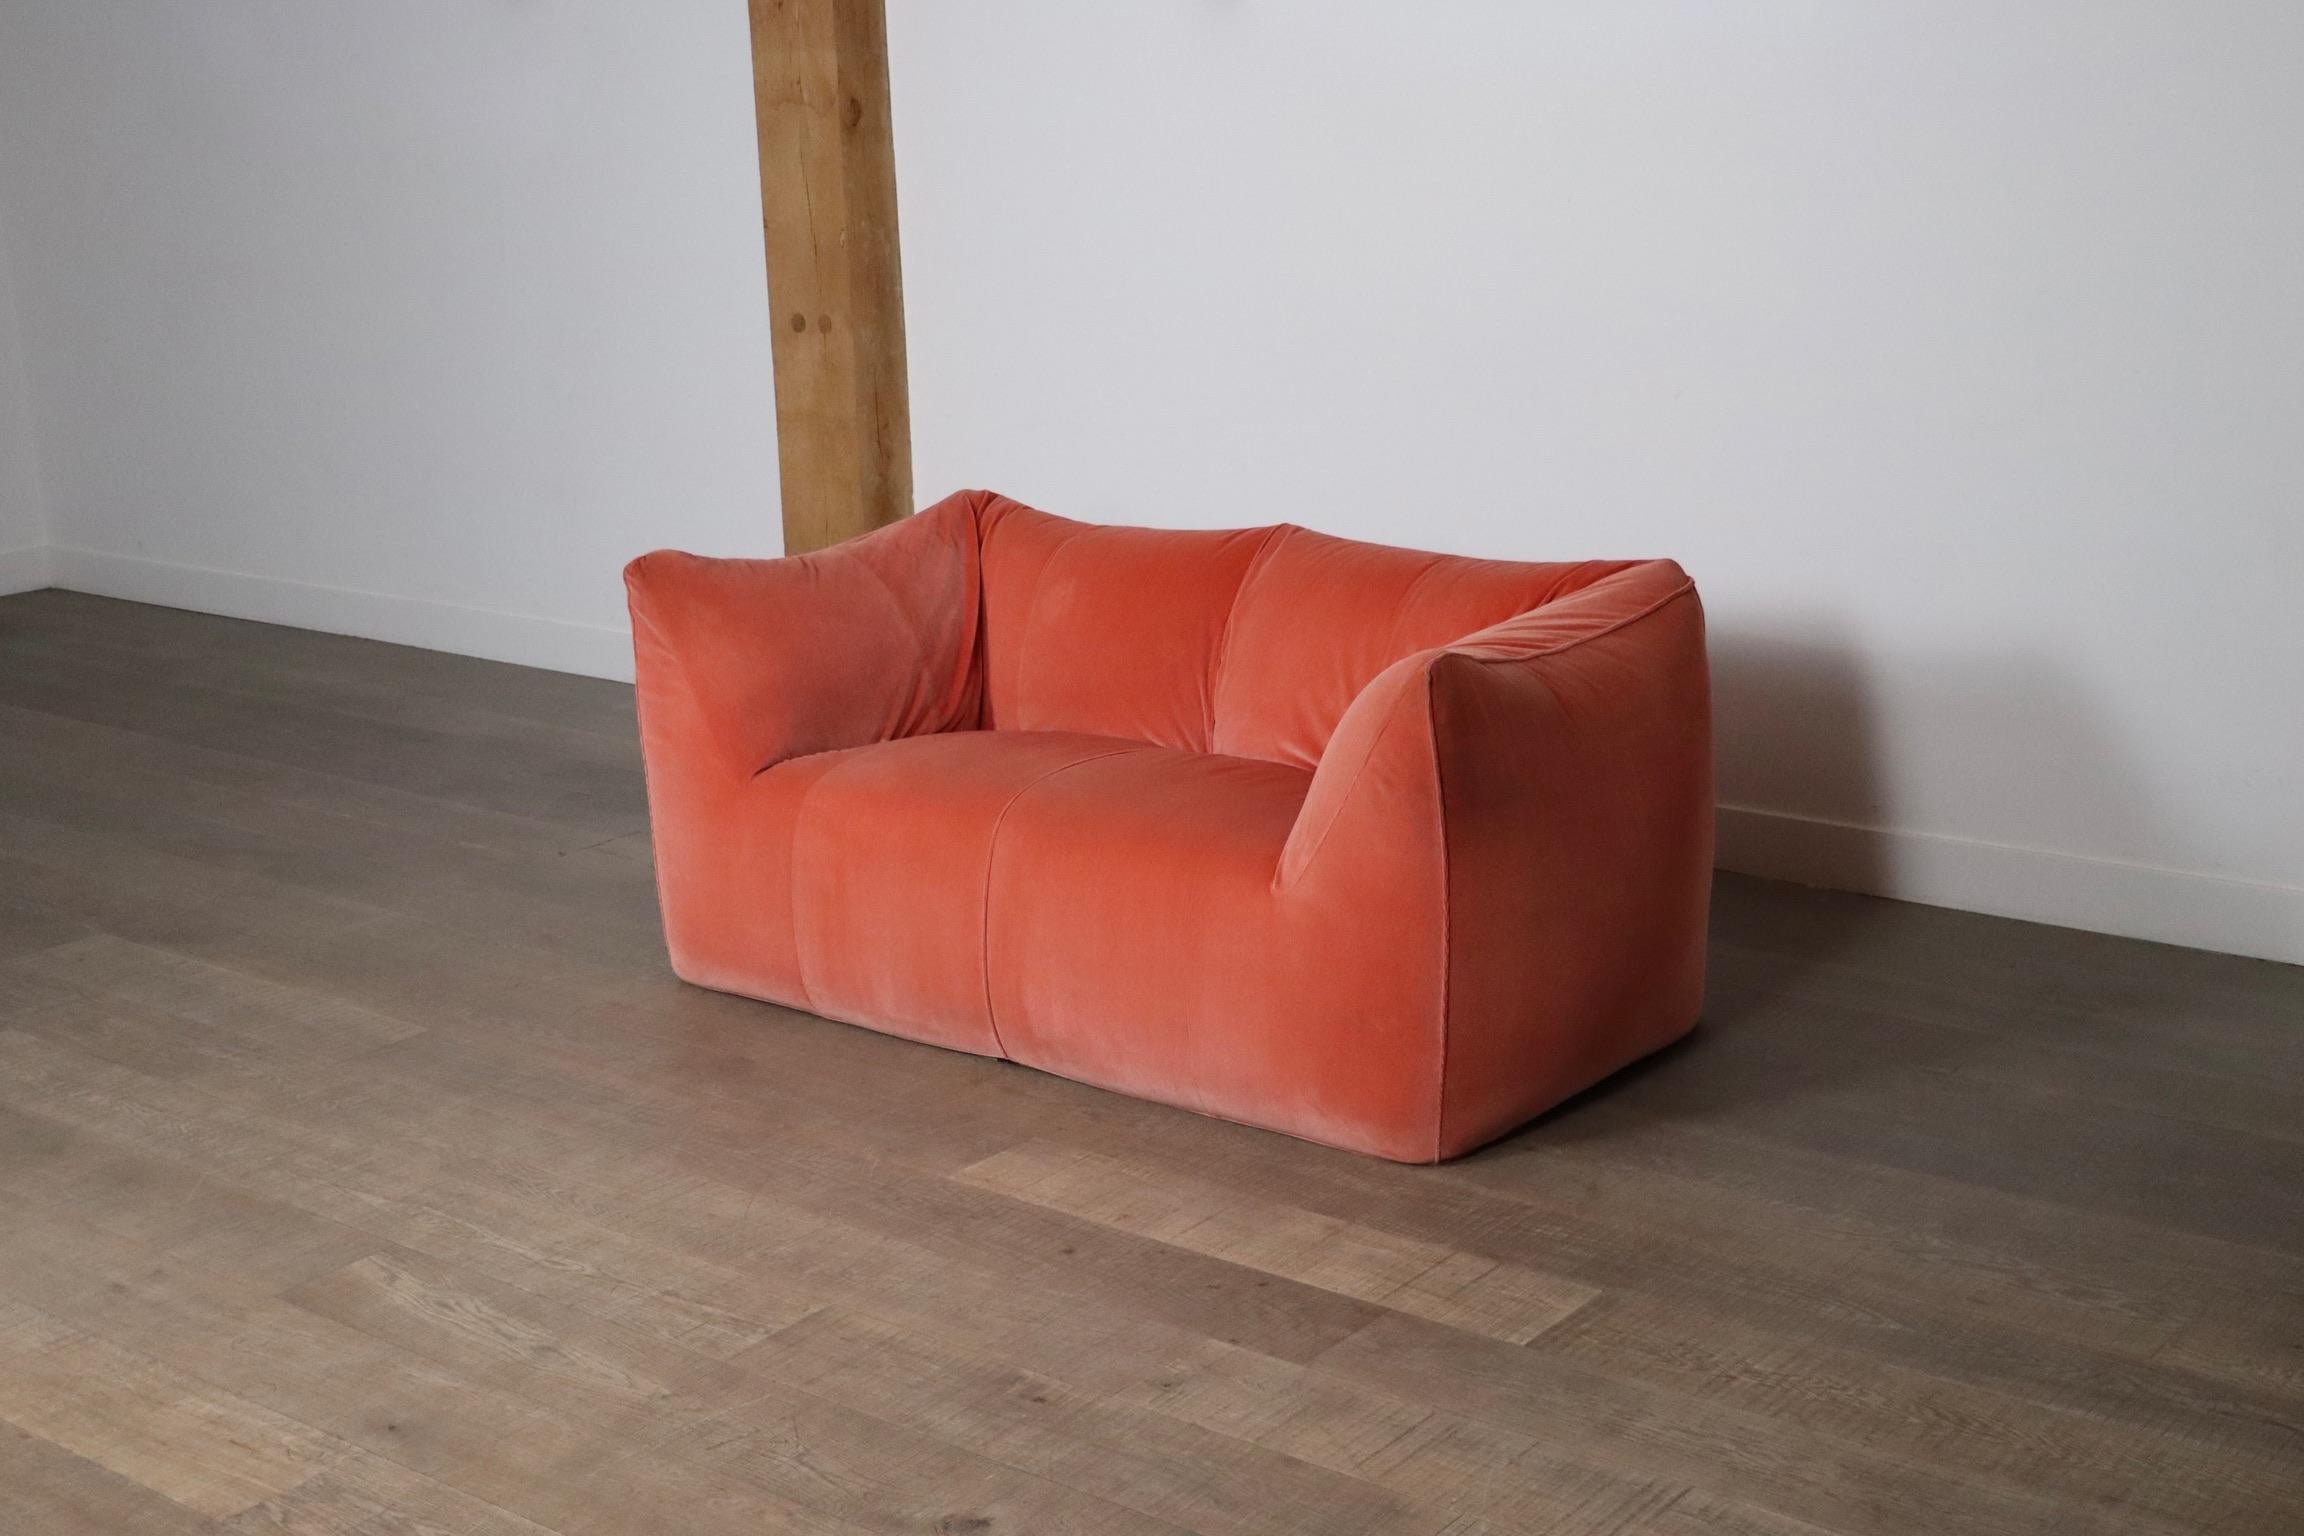 Stunning “Le Bambole” two seater sofa designed by Mario Bellini for B & B Italia in the 1970s. A beautiful edition in high quality coral velvet with a nice soft touch adding to this comfortable and “chunky” design. Besides the outstanding comfort